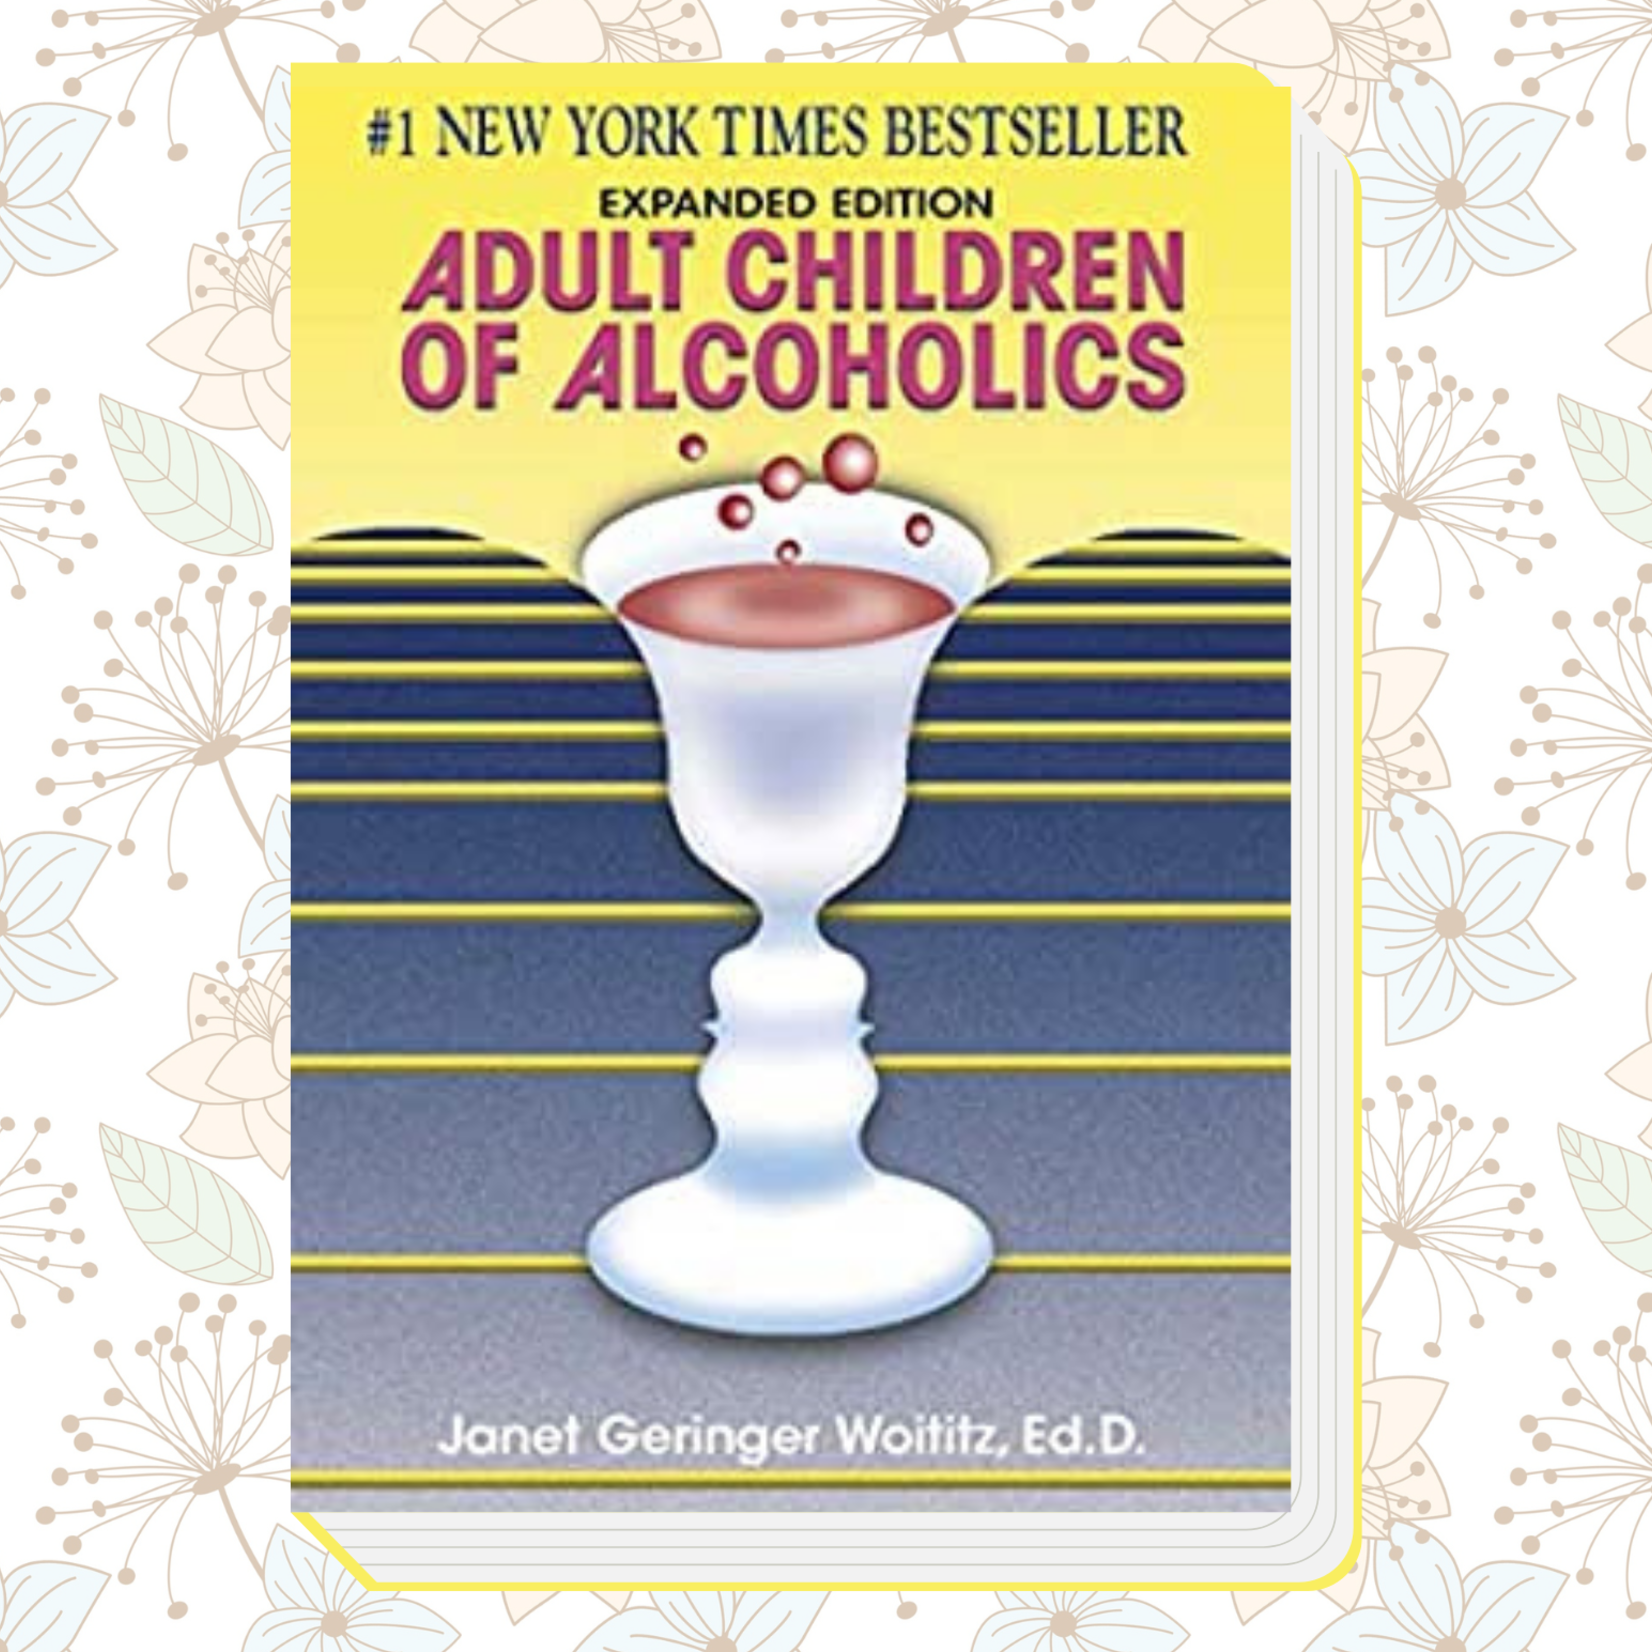 Adult Children of Alcoholics [Expanded Edition]